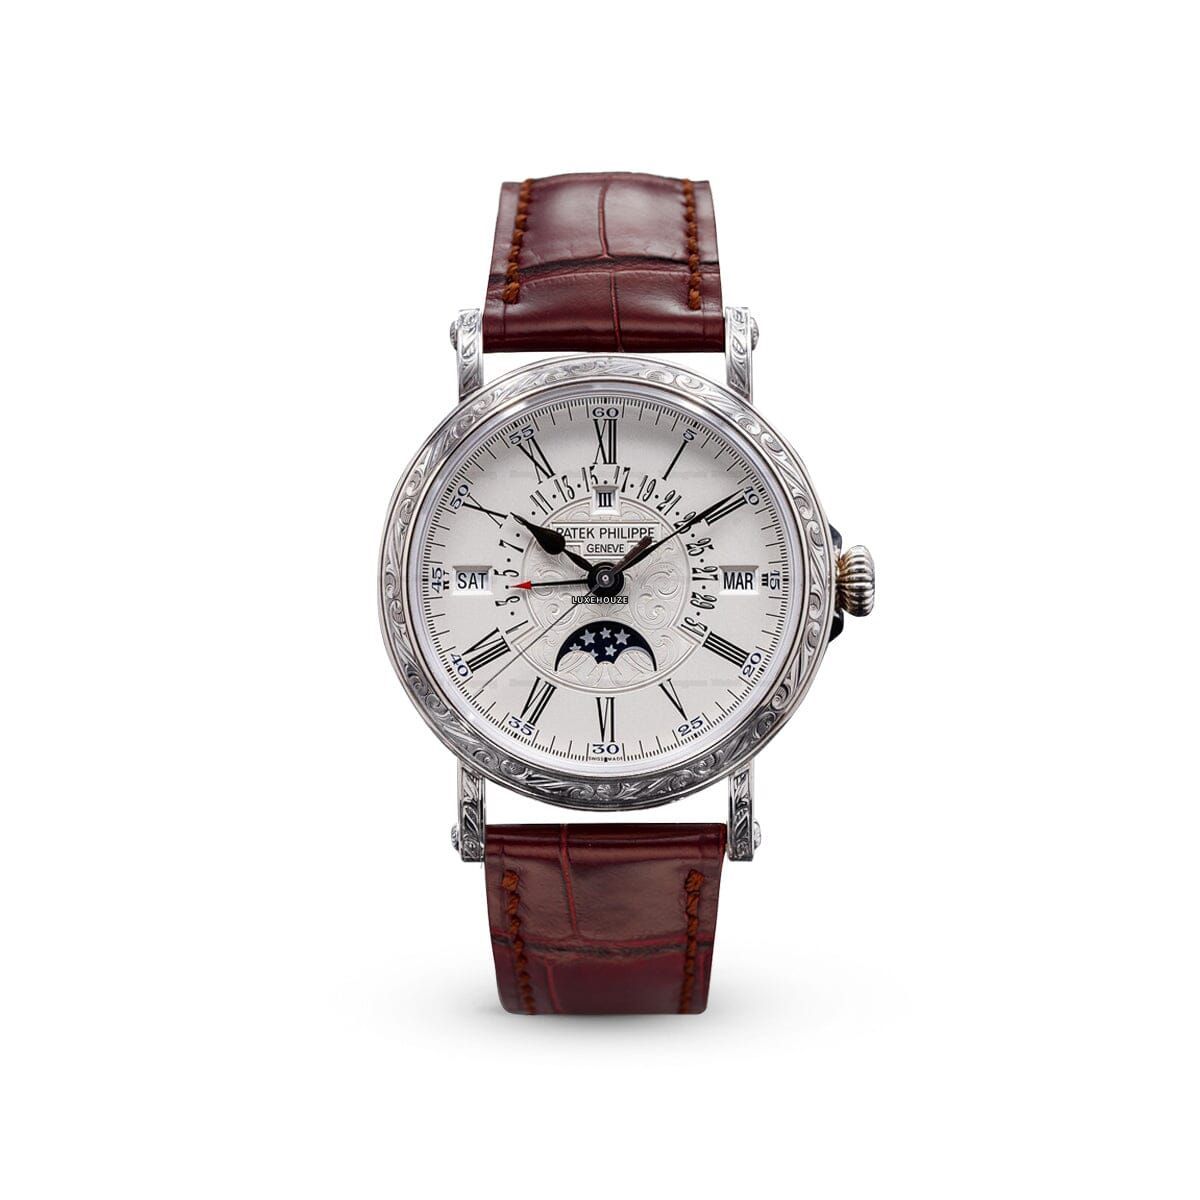 Grand Complications 5160G Silver Watches Patek Philippe 